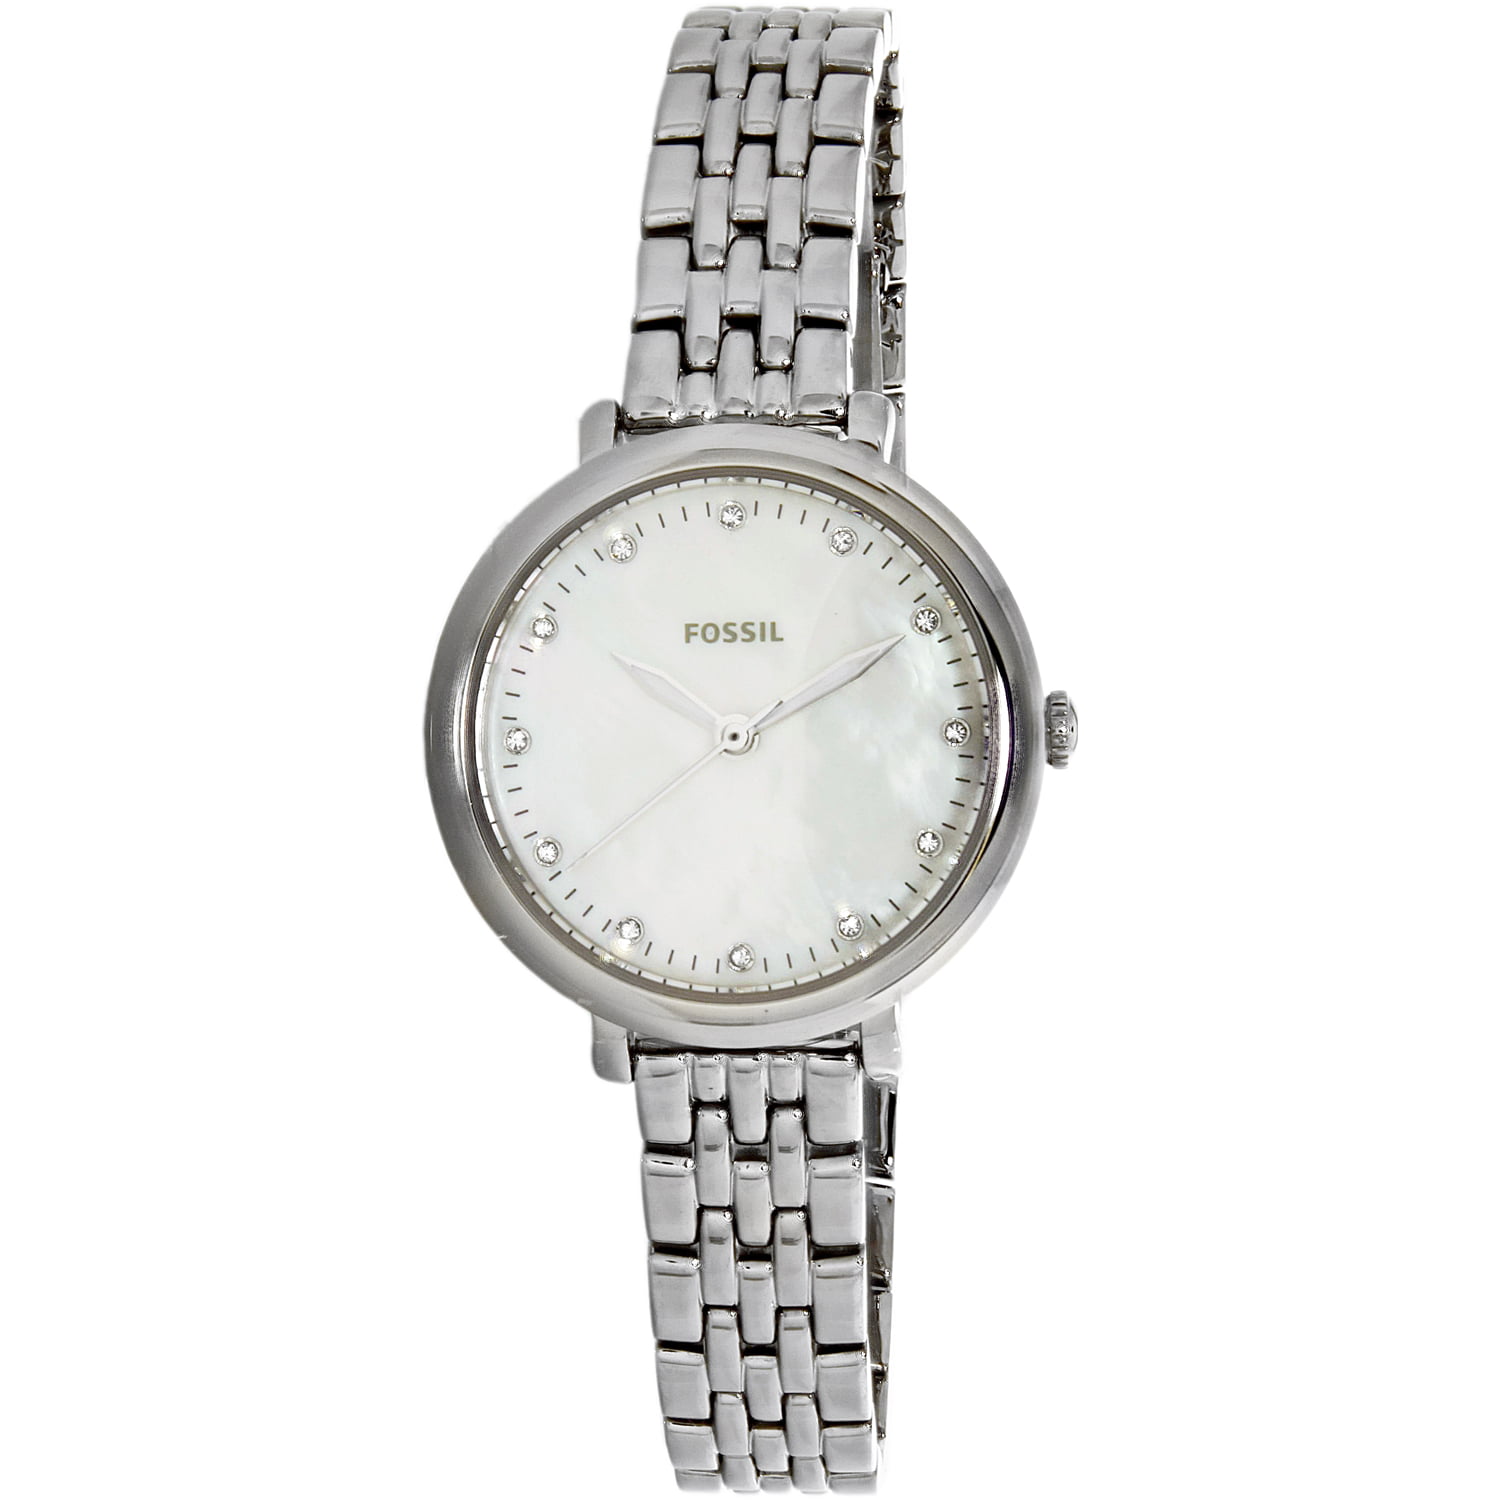 Fossil - Women's Jacqueline ES4029 Silver Stainless-Steel Analog Quartz Fossil Jacqueline Stainless Steel Watch